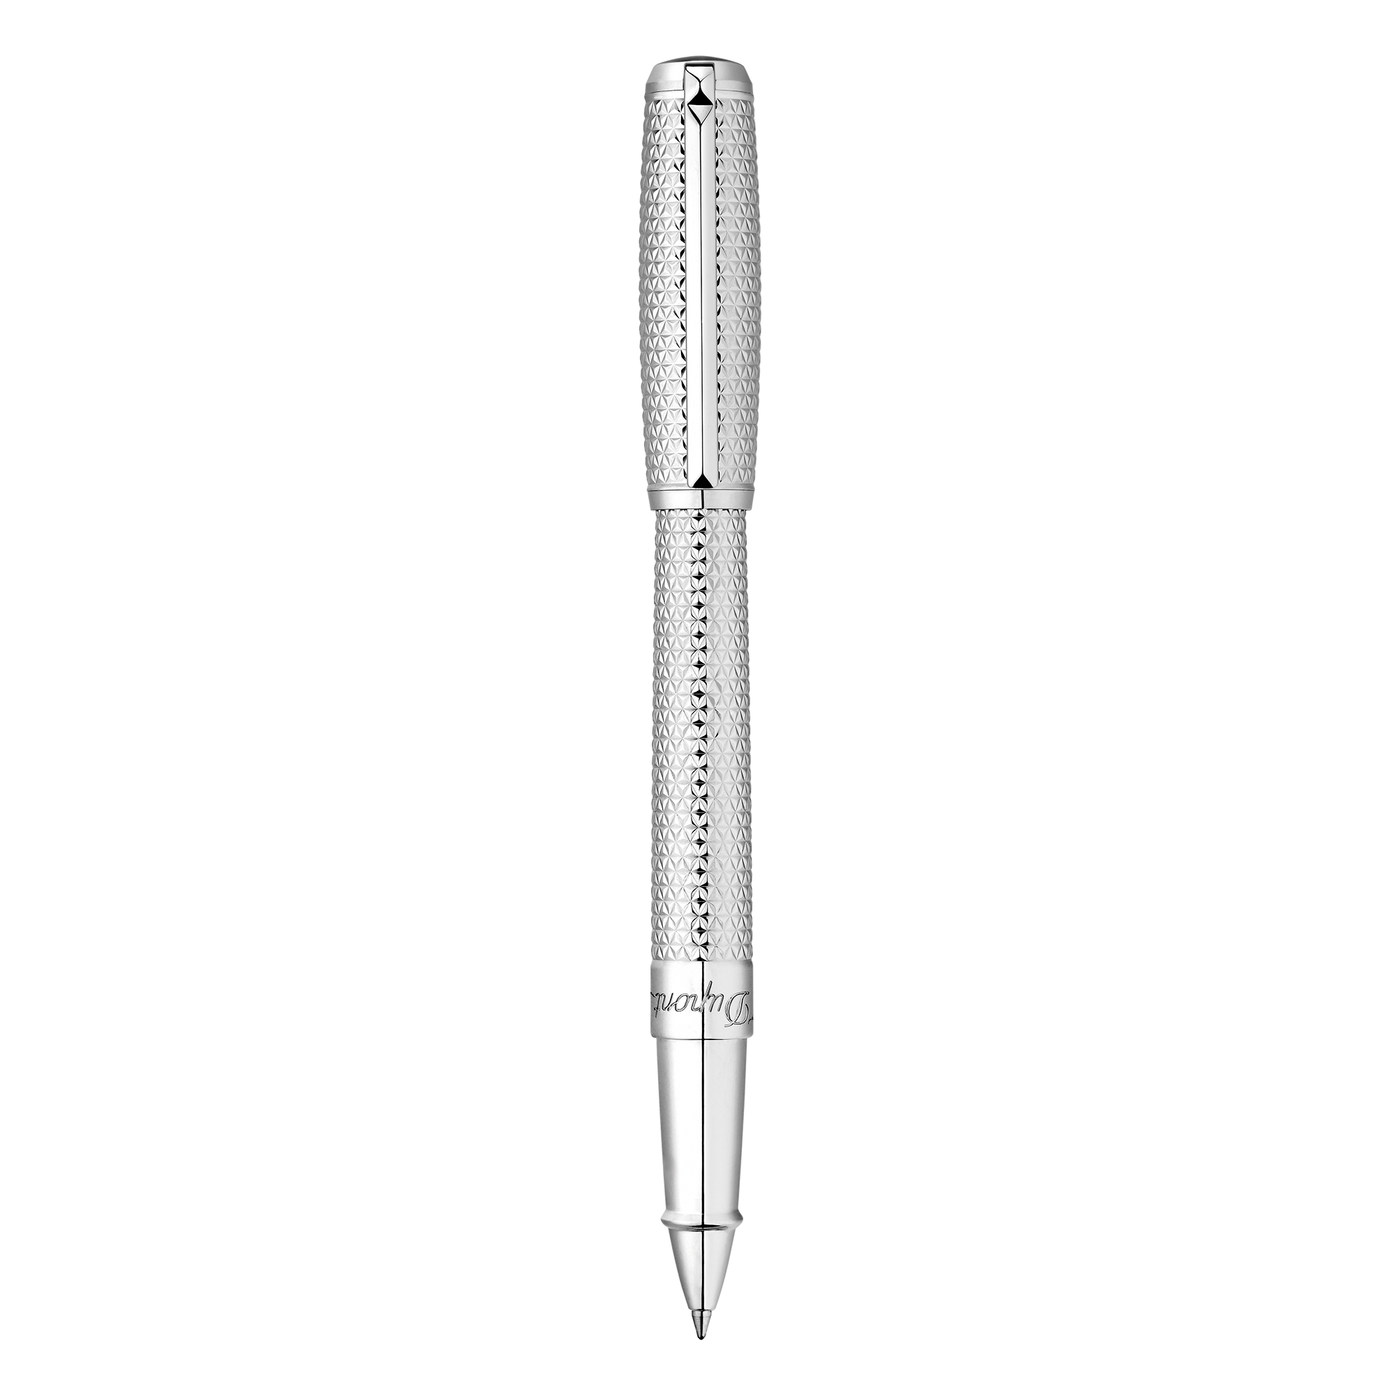 Shop The Latest Collection Of S.T. Dupont Line D Firehead Rollerball Pen - 412703 In Lebanon